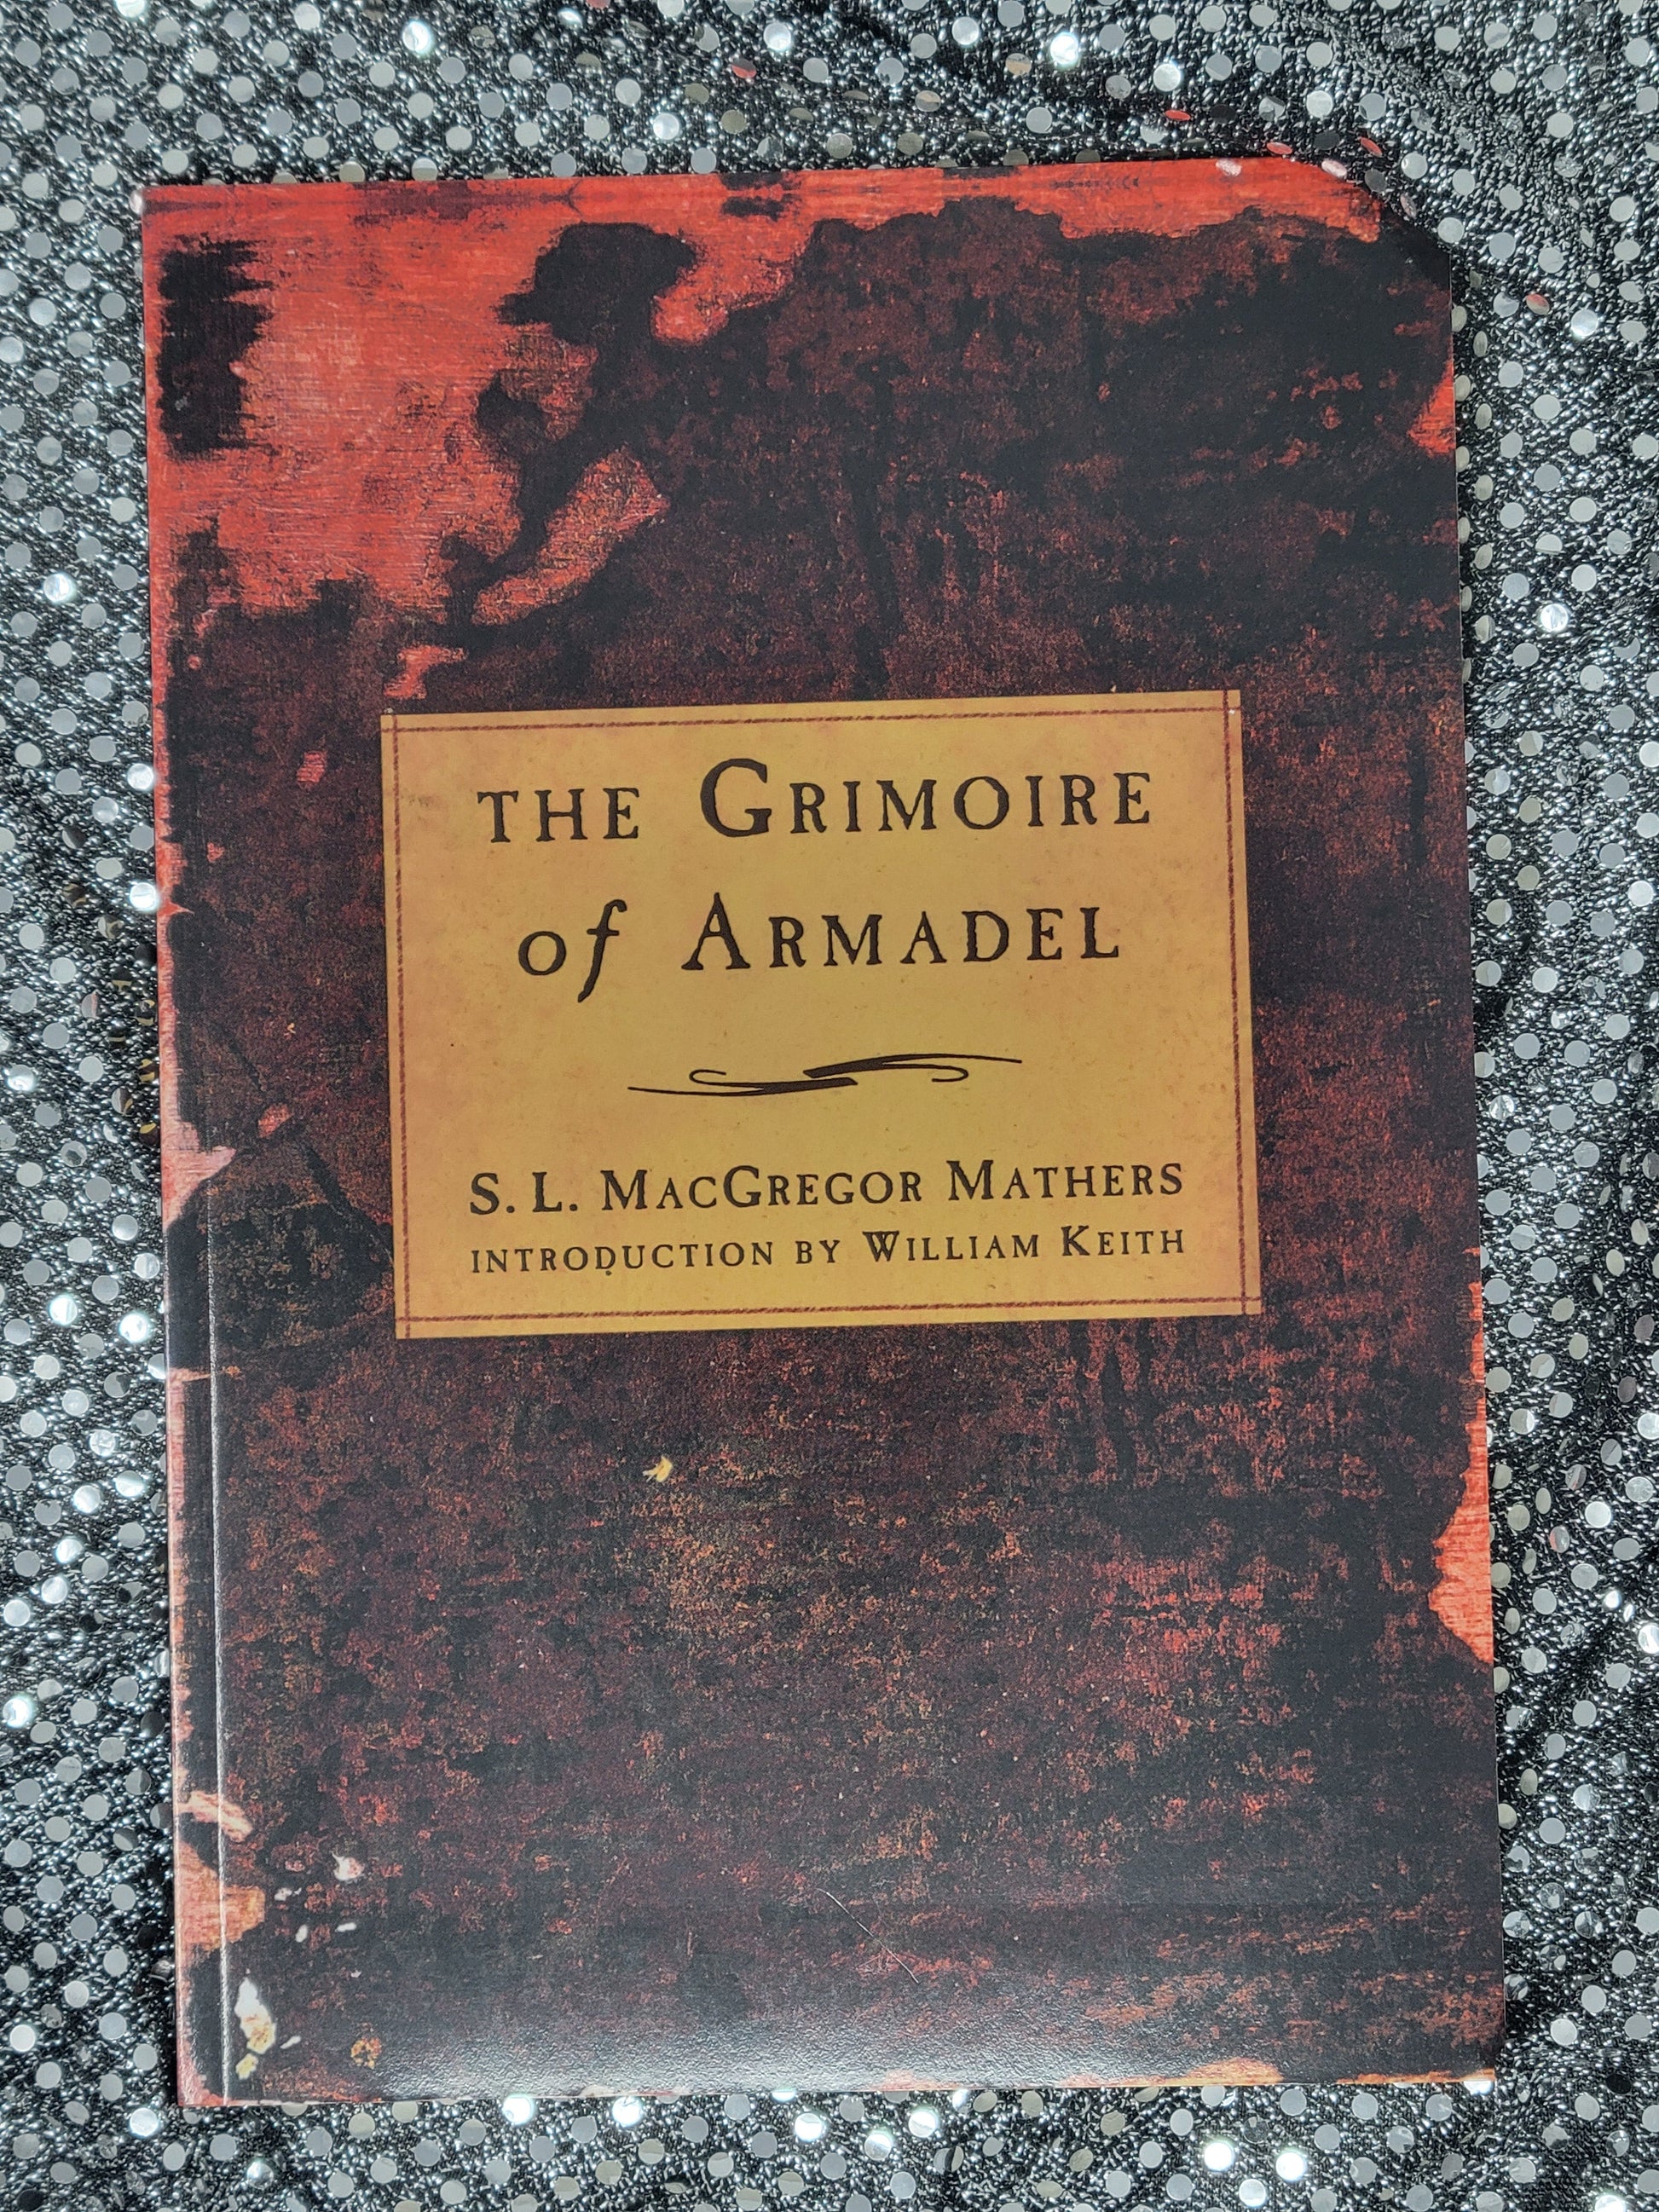 The Grimoire of Armadel - S.L. MacGregor Mathers